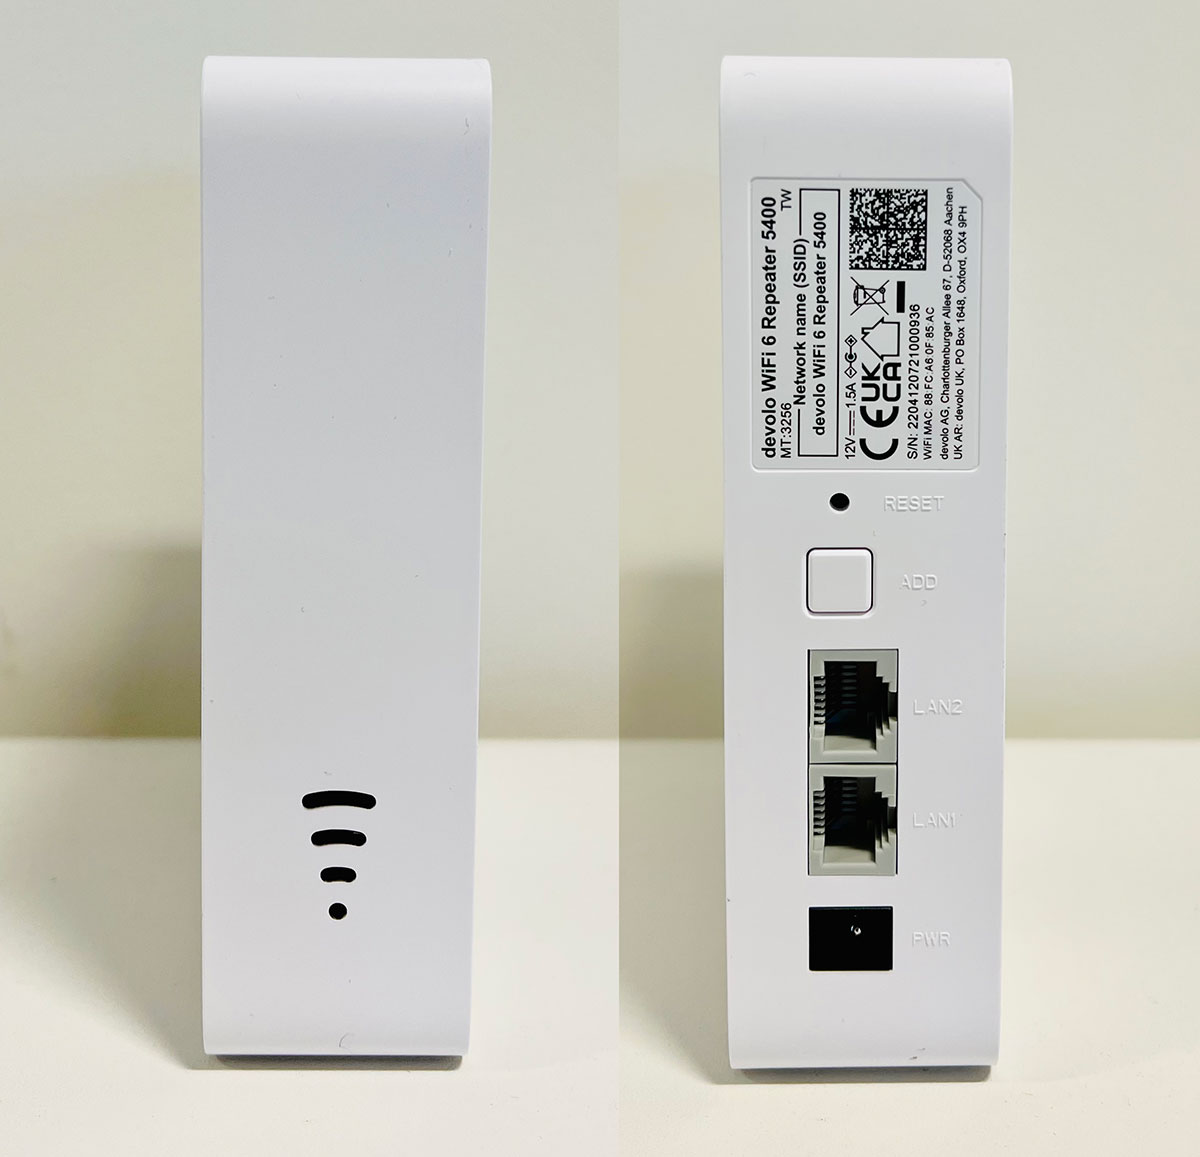 Devolo WiFi 6 repeater 5400 front and back views